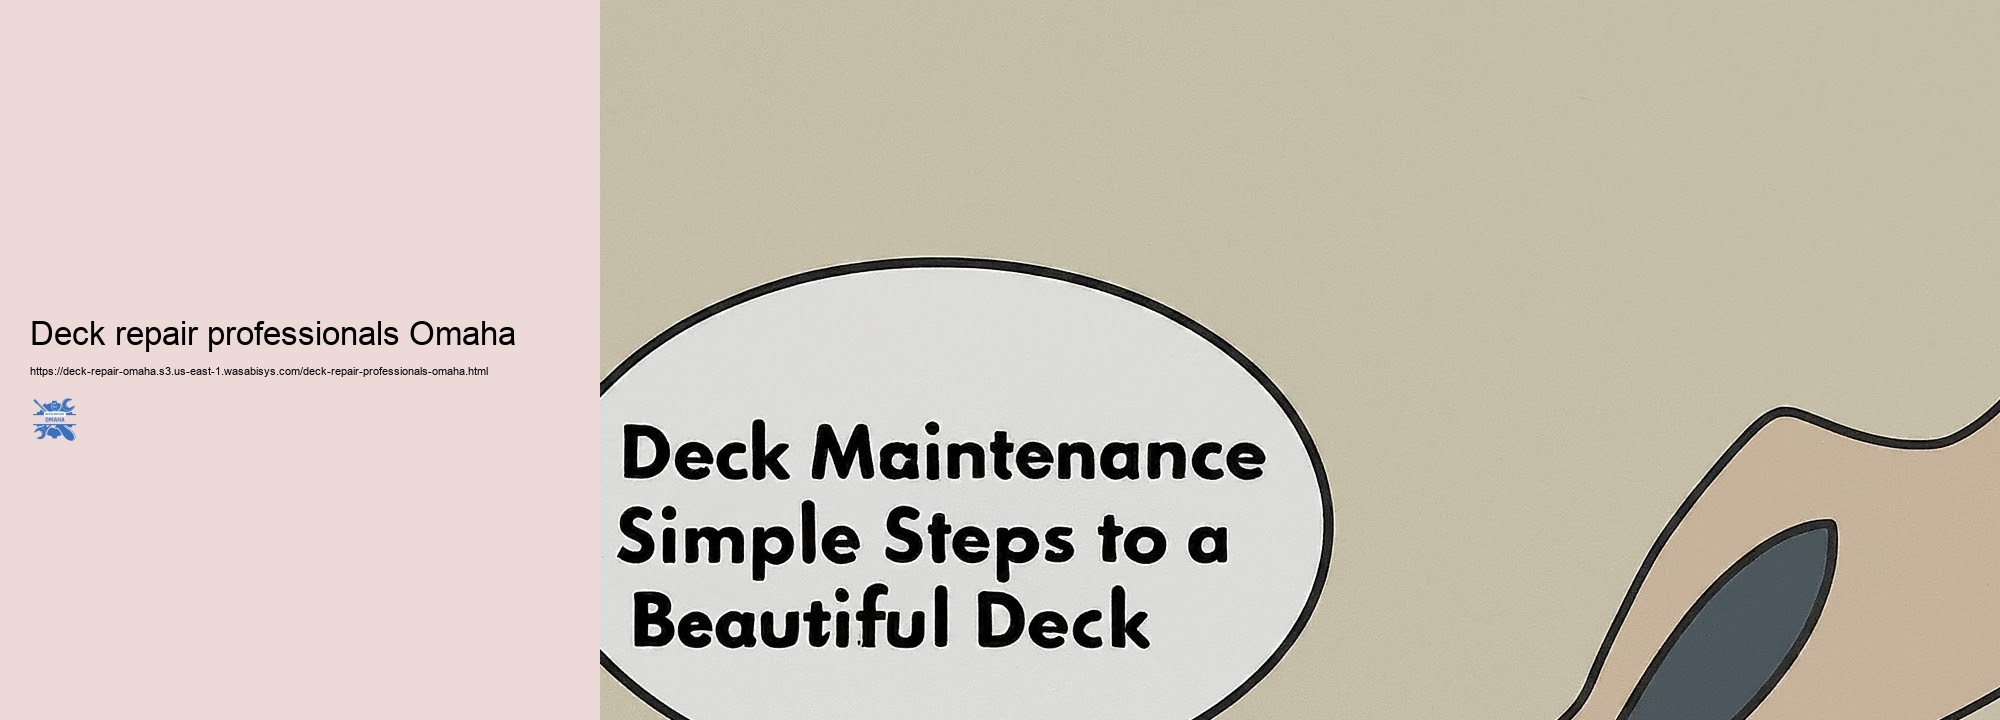 Affordable Deck Repair Solutions for Omaha Locals